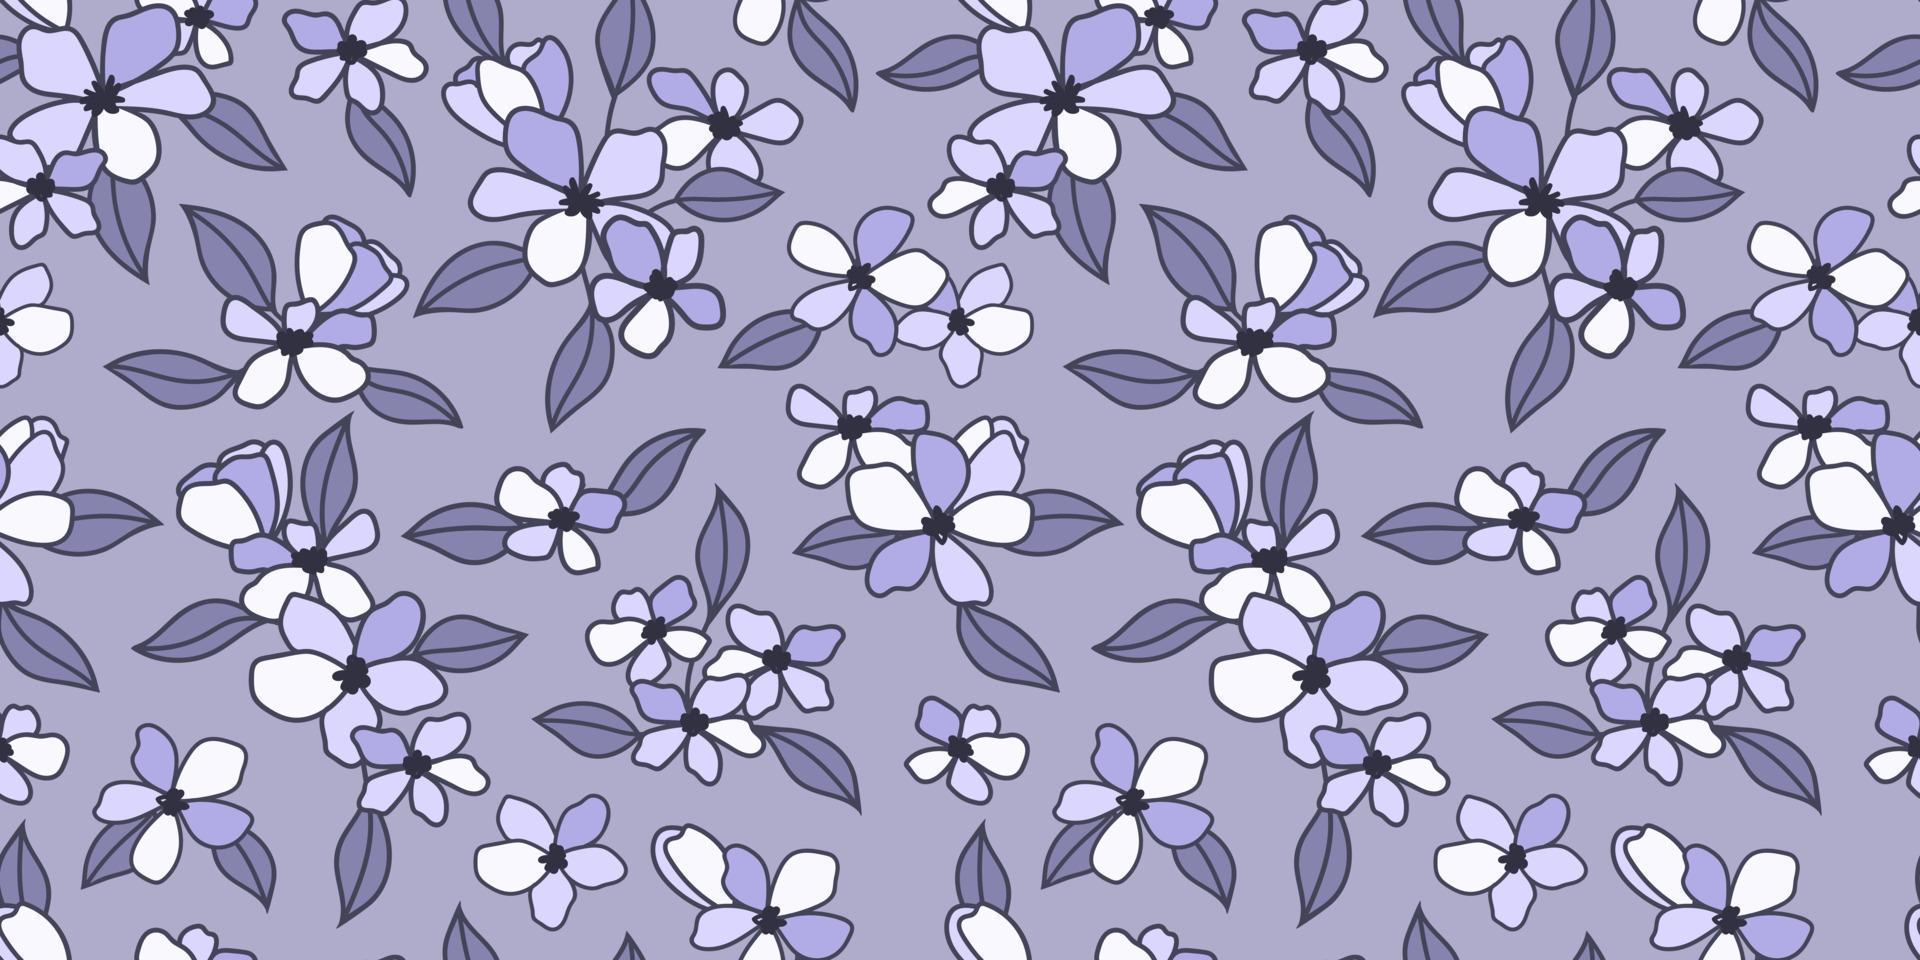 Blue floral pattern, hand drawn vector repeat background, illustrated flowers perfect spring wallpaper.